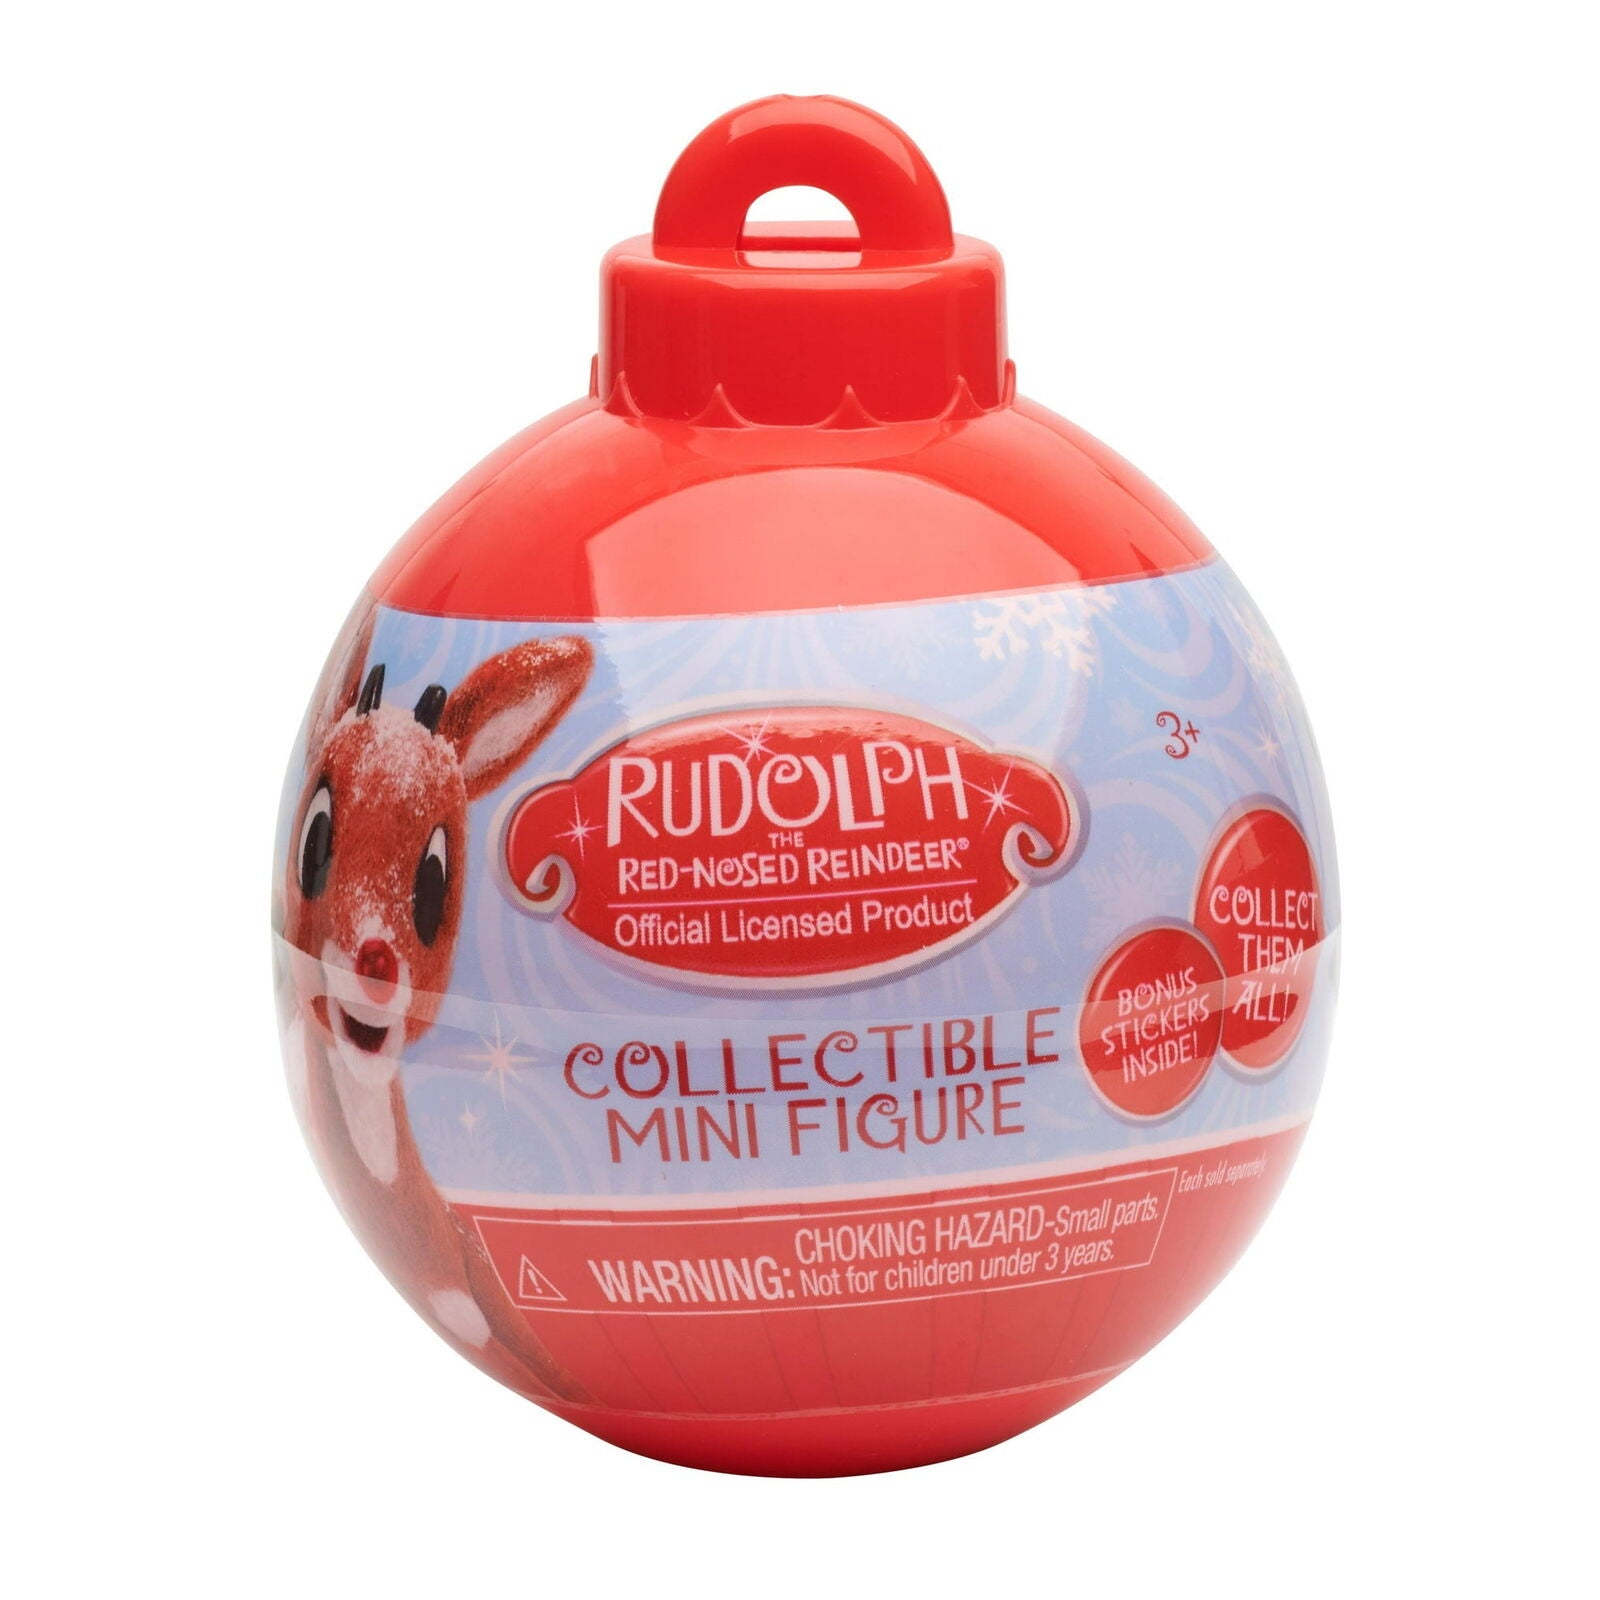 Rudolph the Red-Nosed Reindeer Mini Figure Surprise Ornament Holiday Capsule